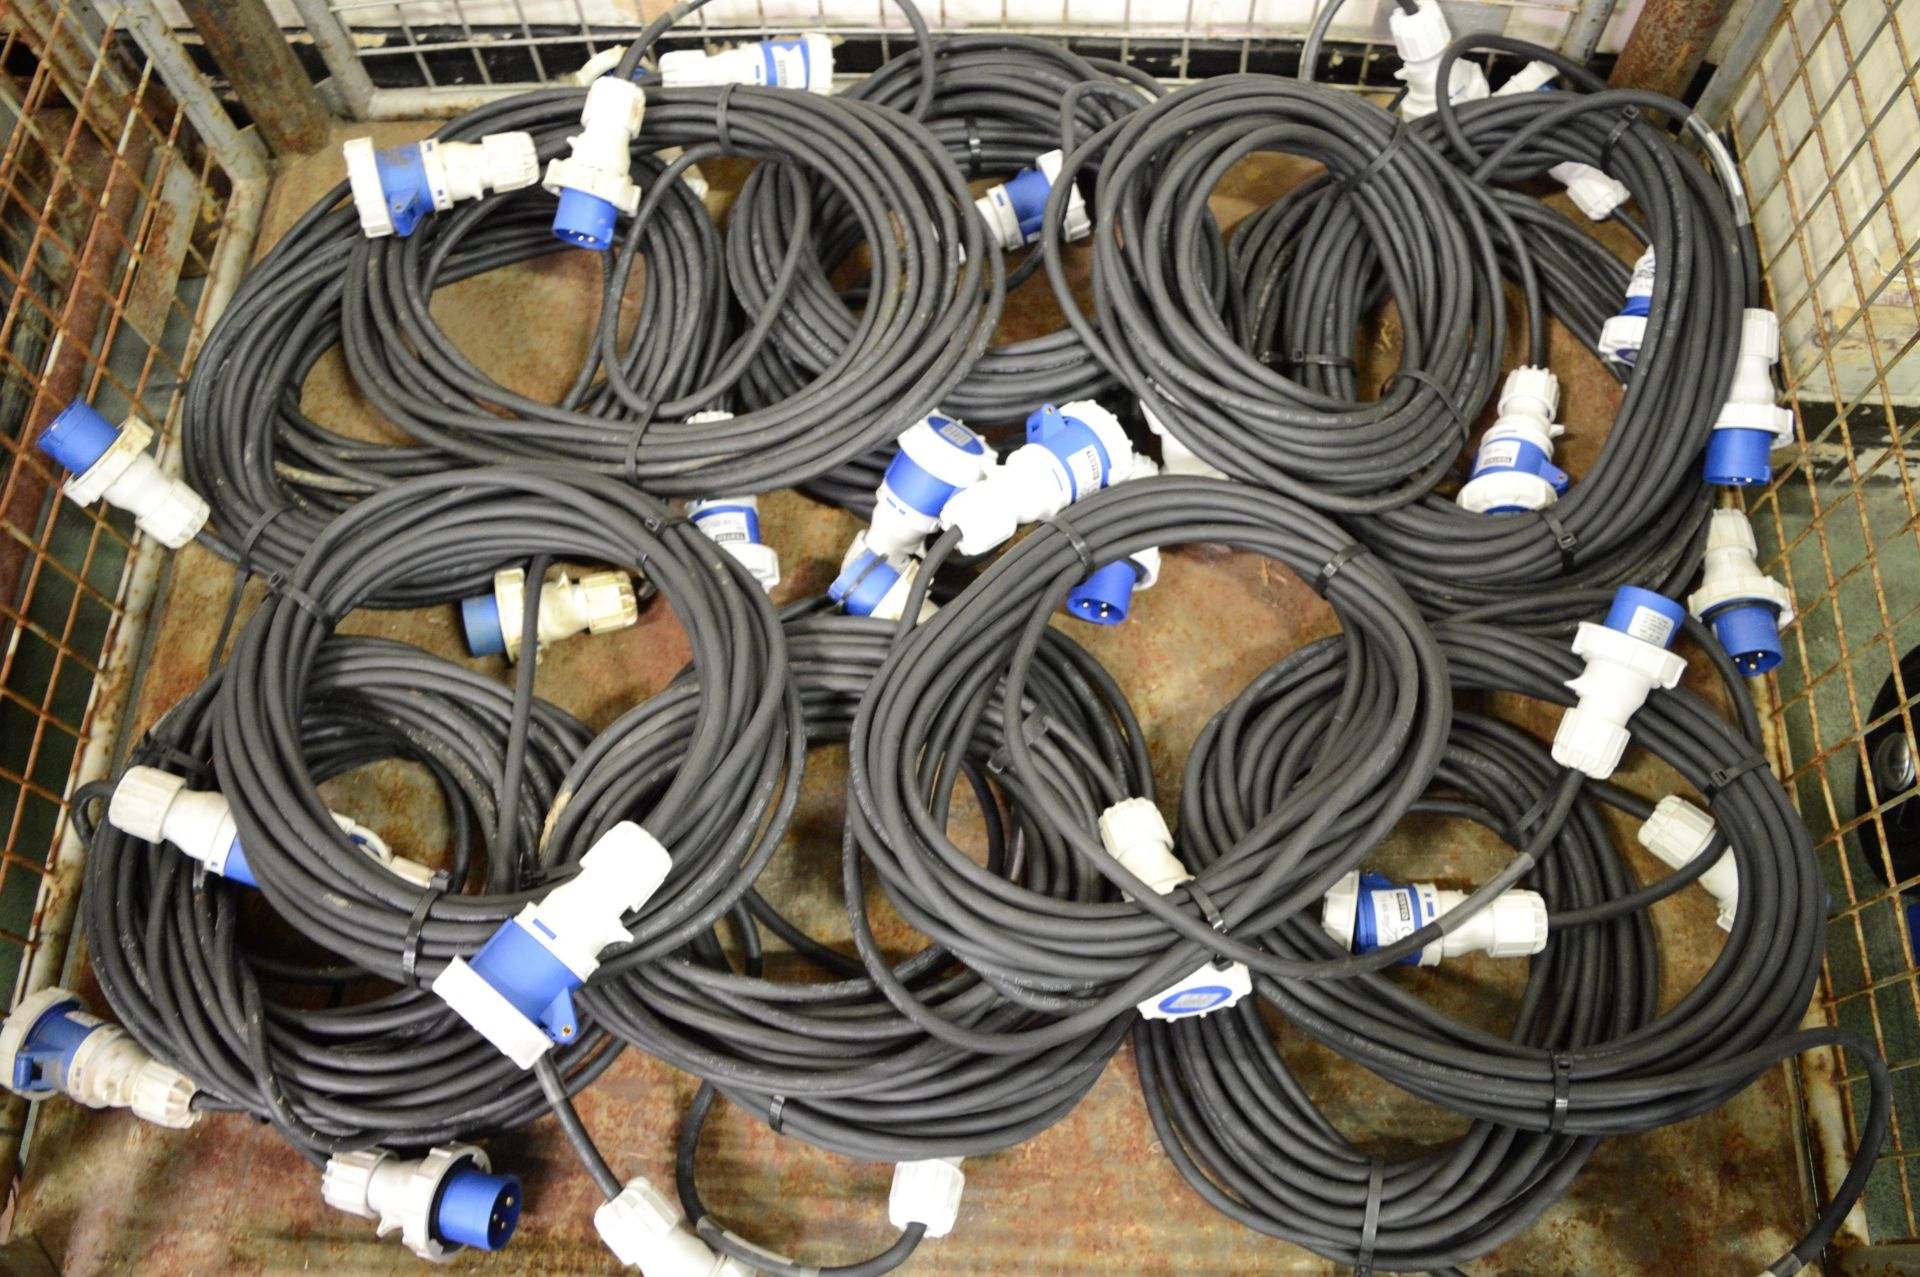 16x Blakley Extension Cable IP67 230v 16A 2P-E. - Image 2 of 2